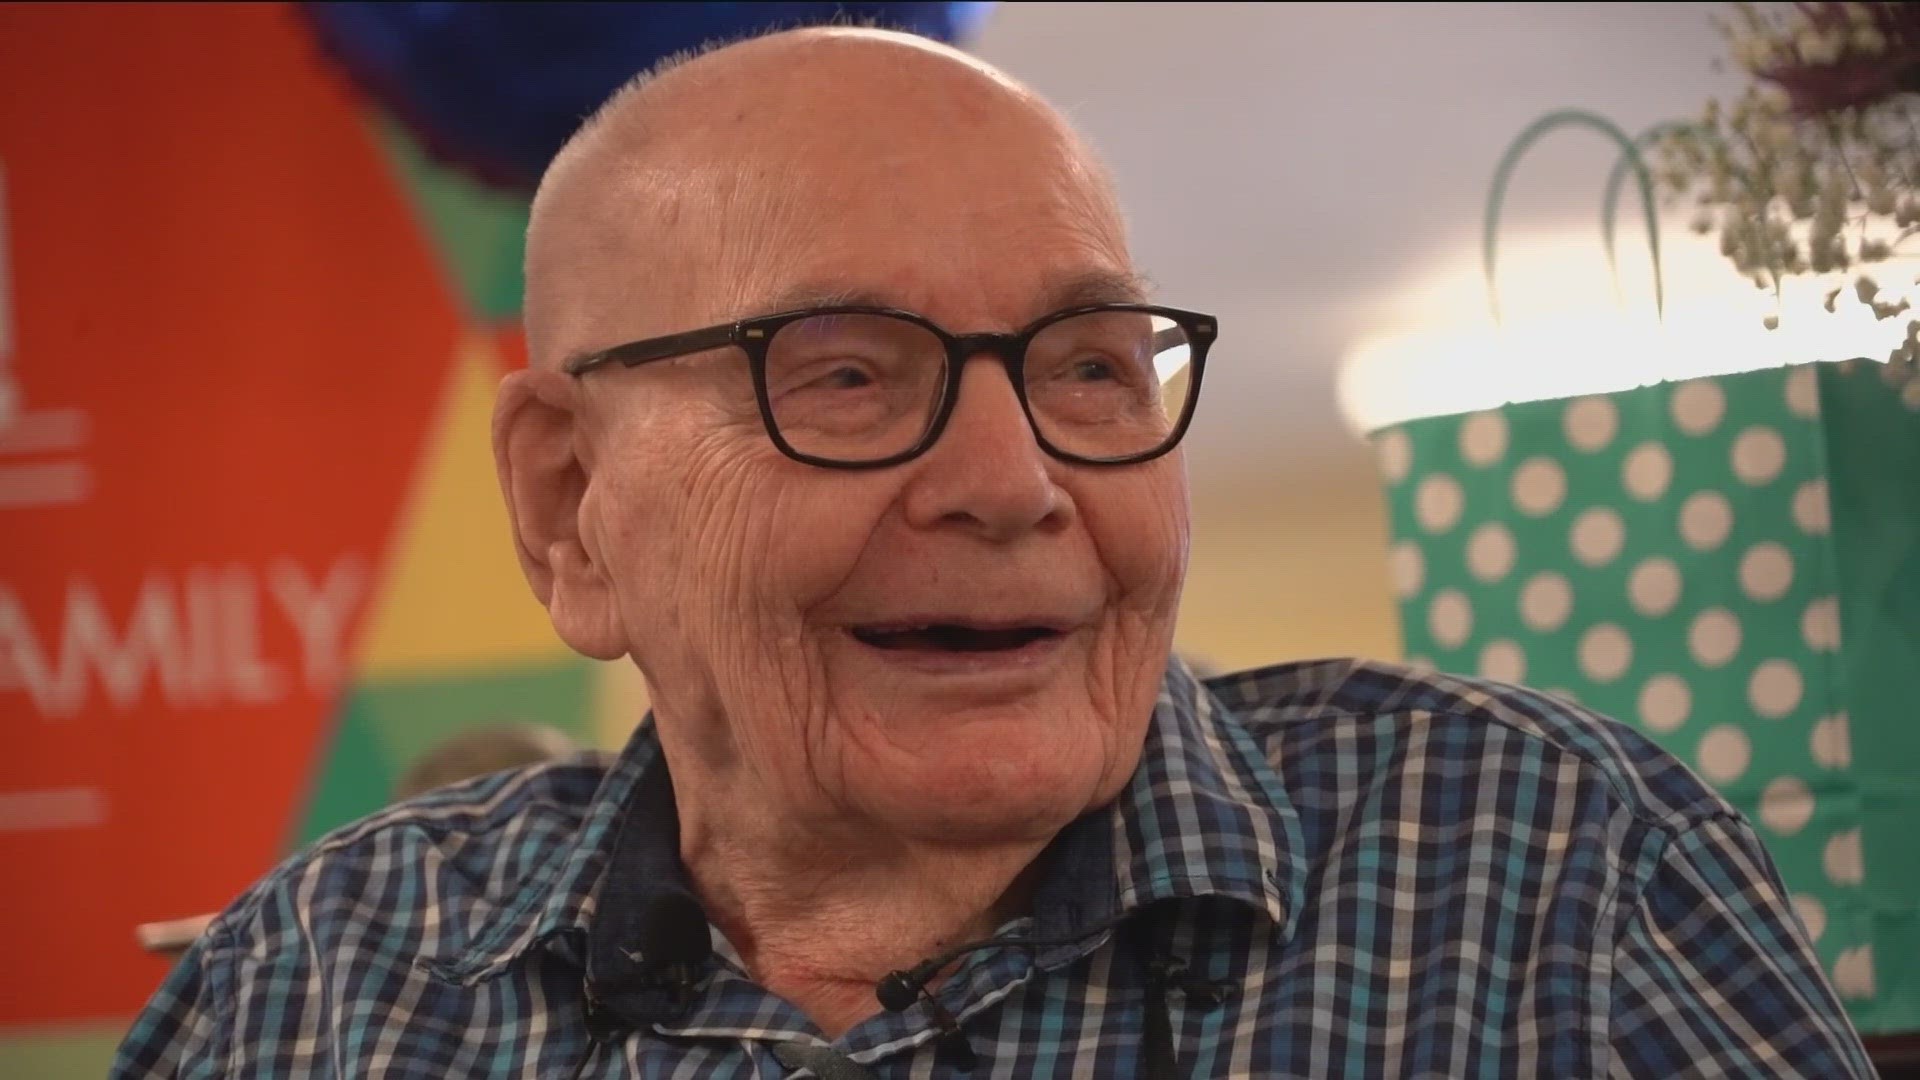 Karl Schlessinger celebrated his 106th birthday on Monday. He is a World War II veteran.